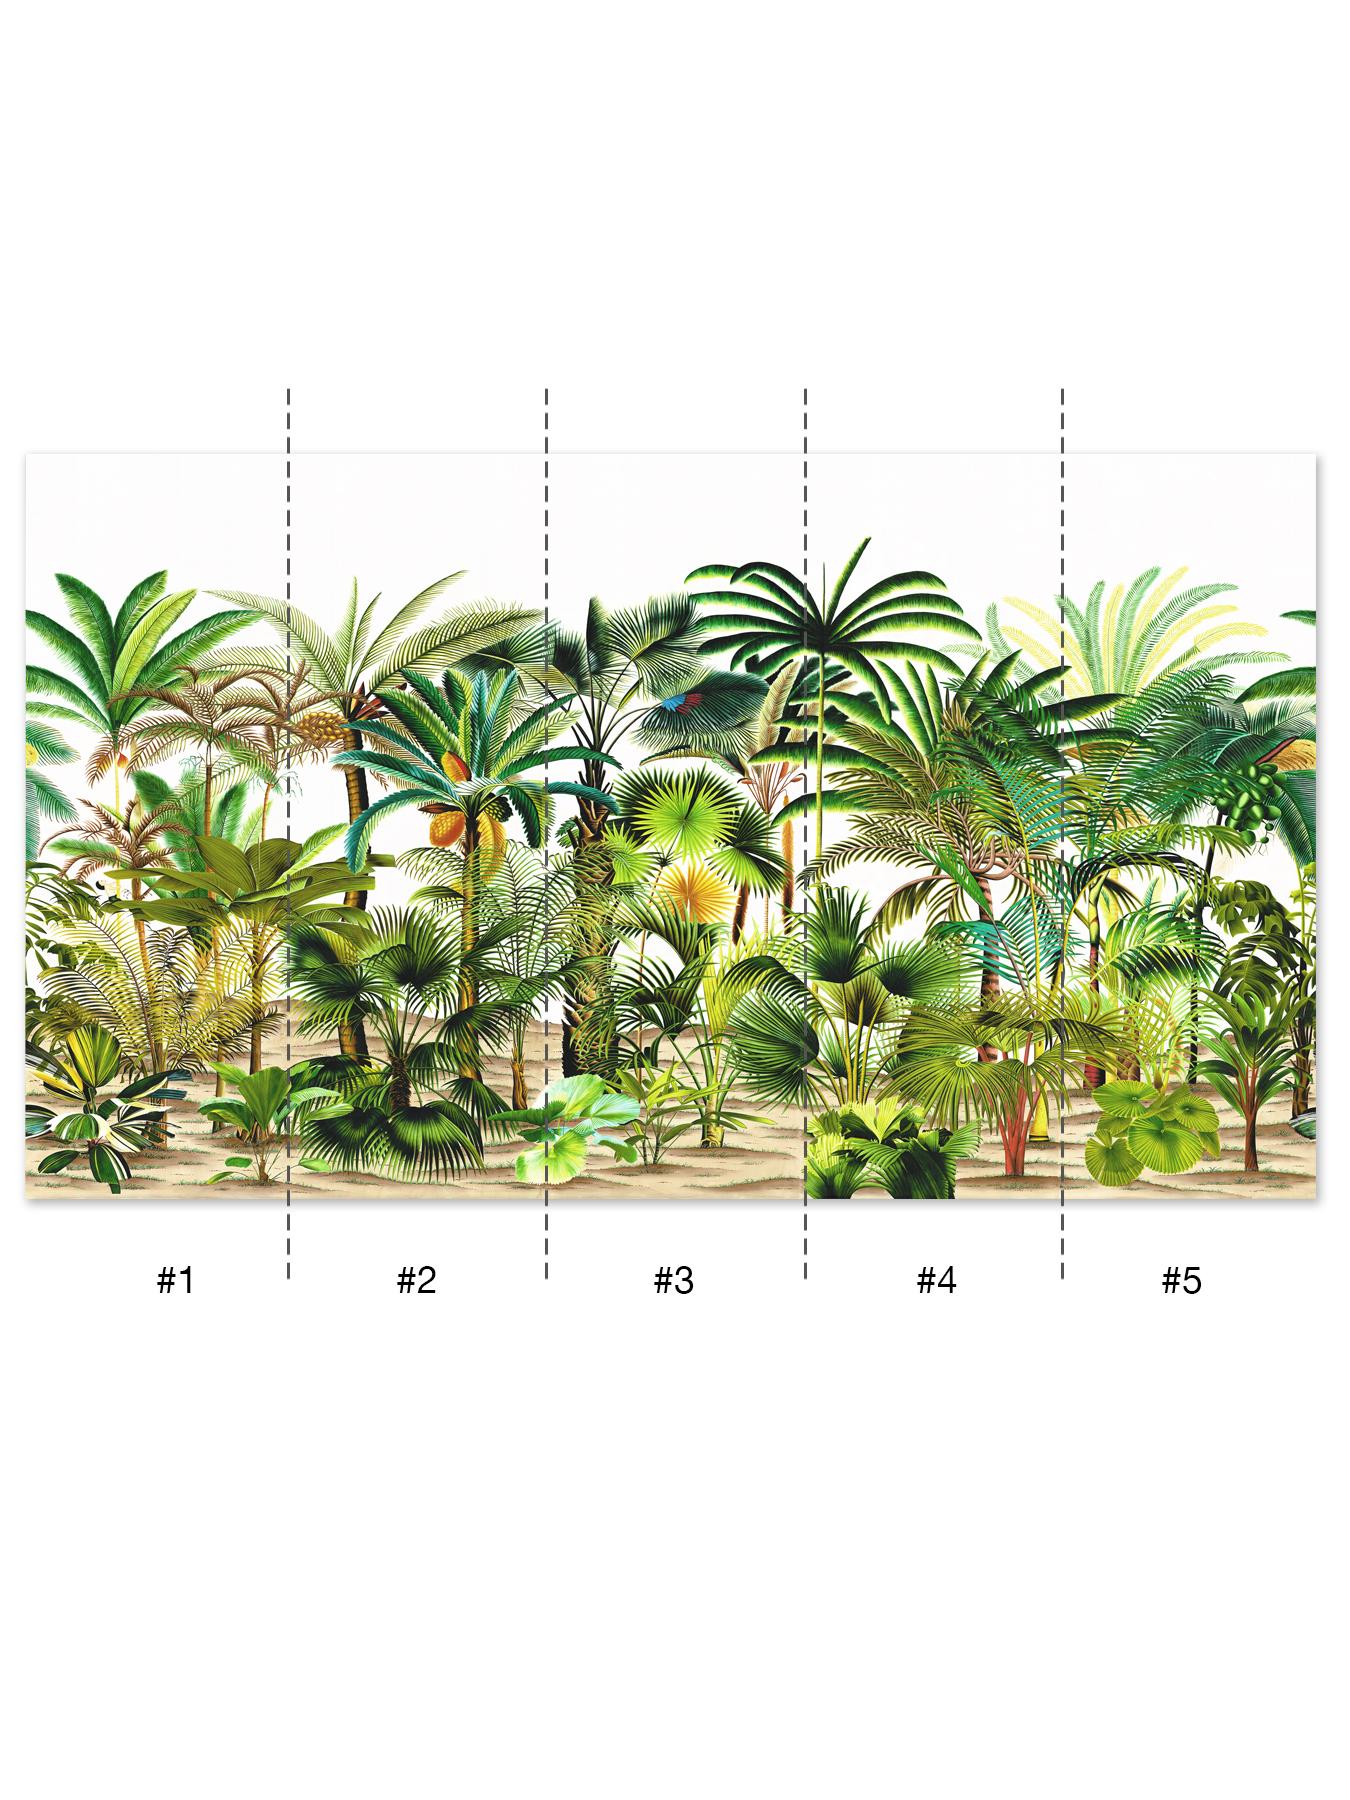 Palmetum, a colorful tropical forest, is a vibrant celebration of life. In this mural, a variety of palm plants create a flourishing and energetic background. This biophilic mural is suitable for many design styles. The 5 panels of Palmetum are hand